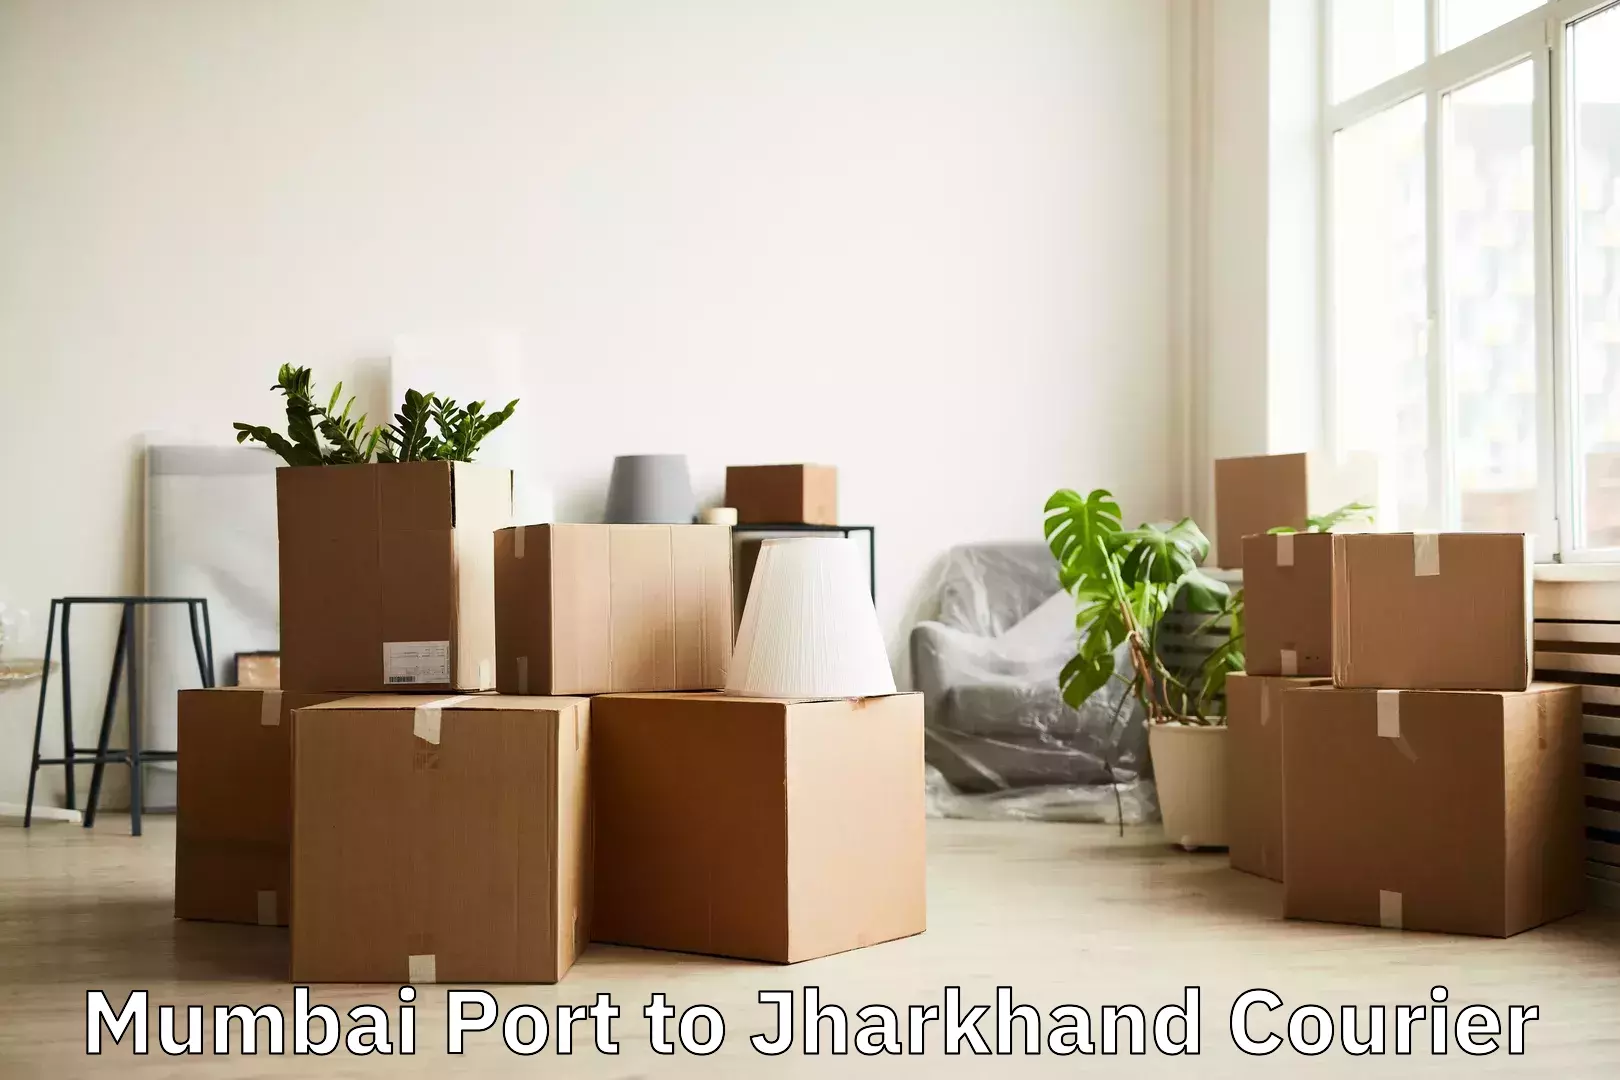 Luggage shipping planner in Mumbai Port to Jharkhand